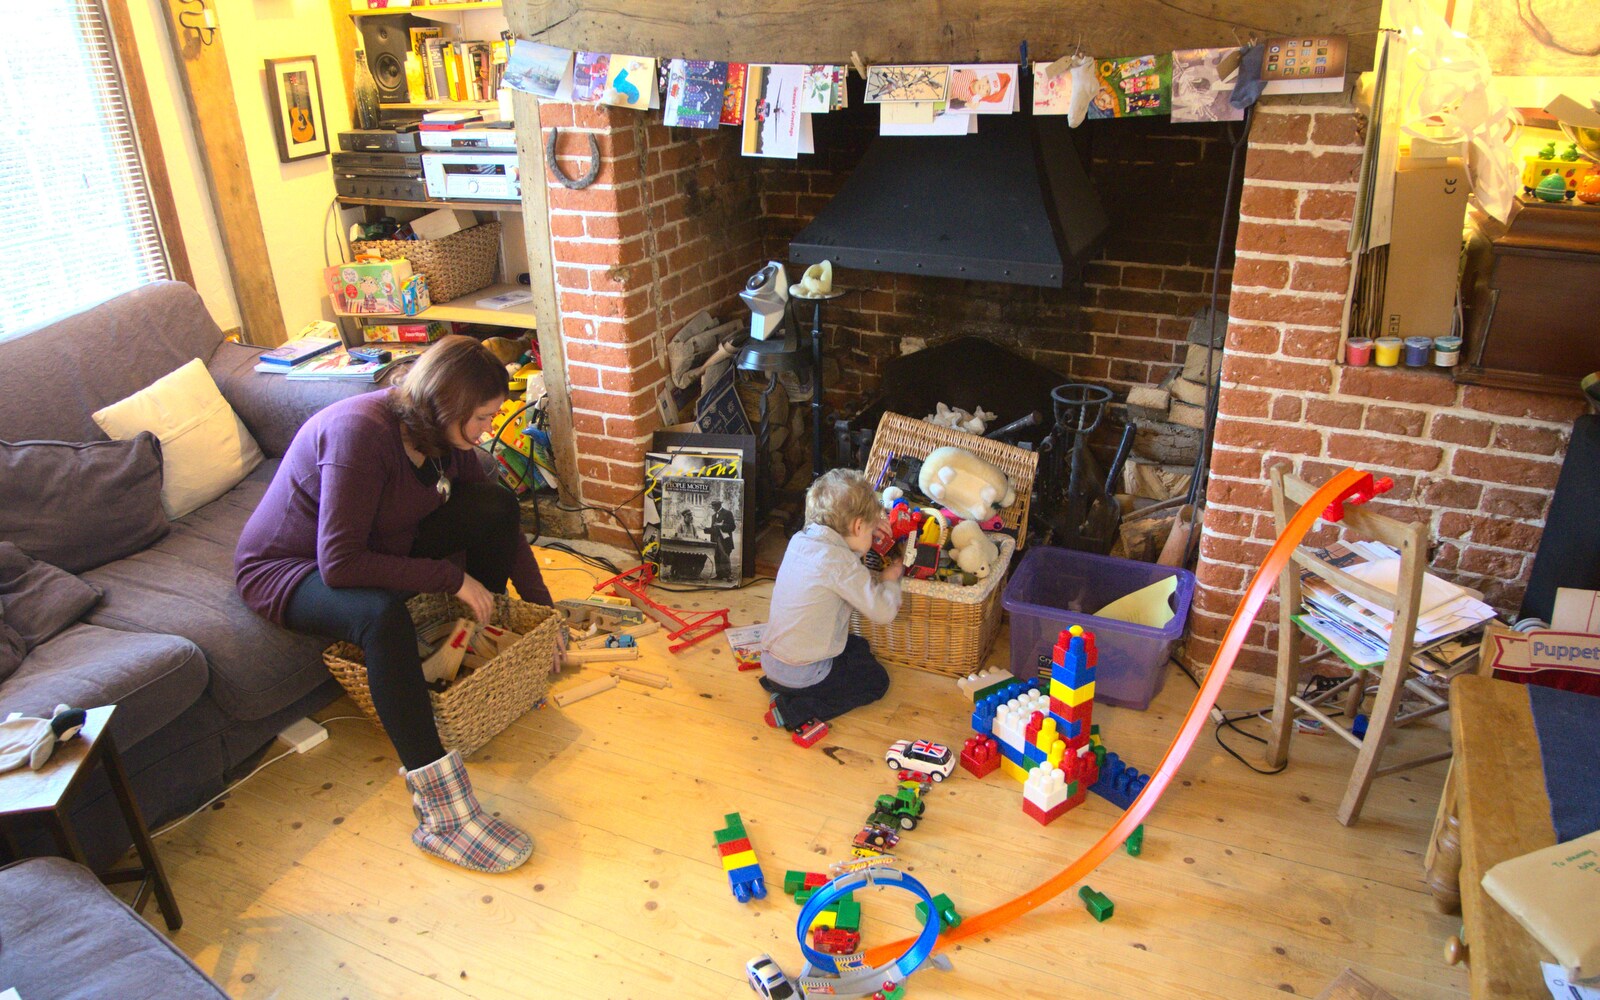 A new 'Hot Wheels' track is all set up from Christmas Day in the Swan Inn, Brome, Suffolk - 25th December 2011